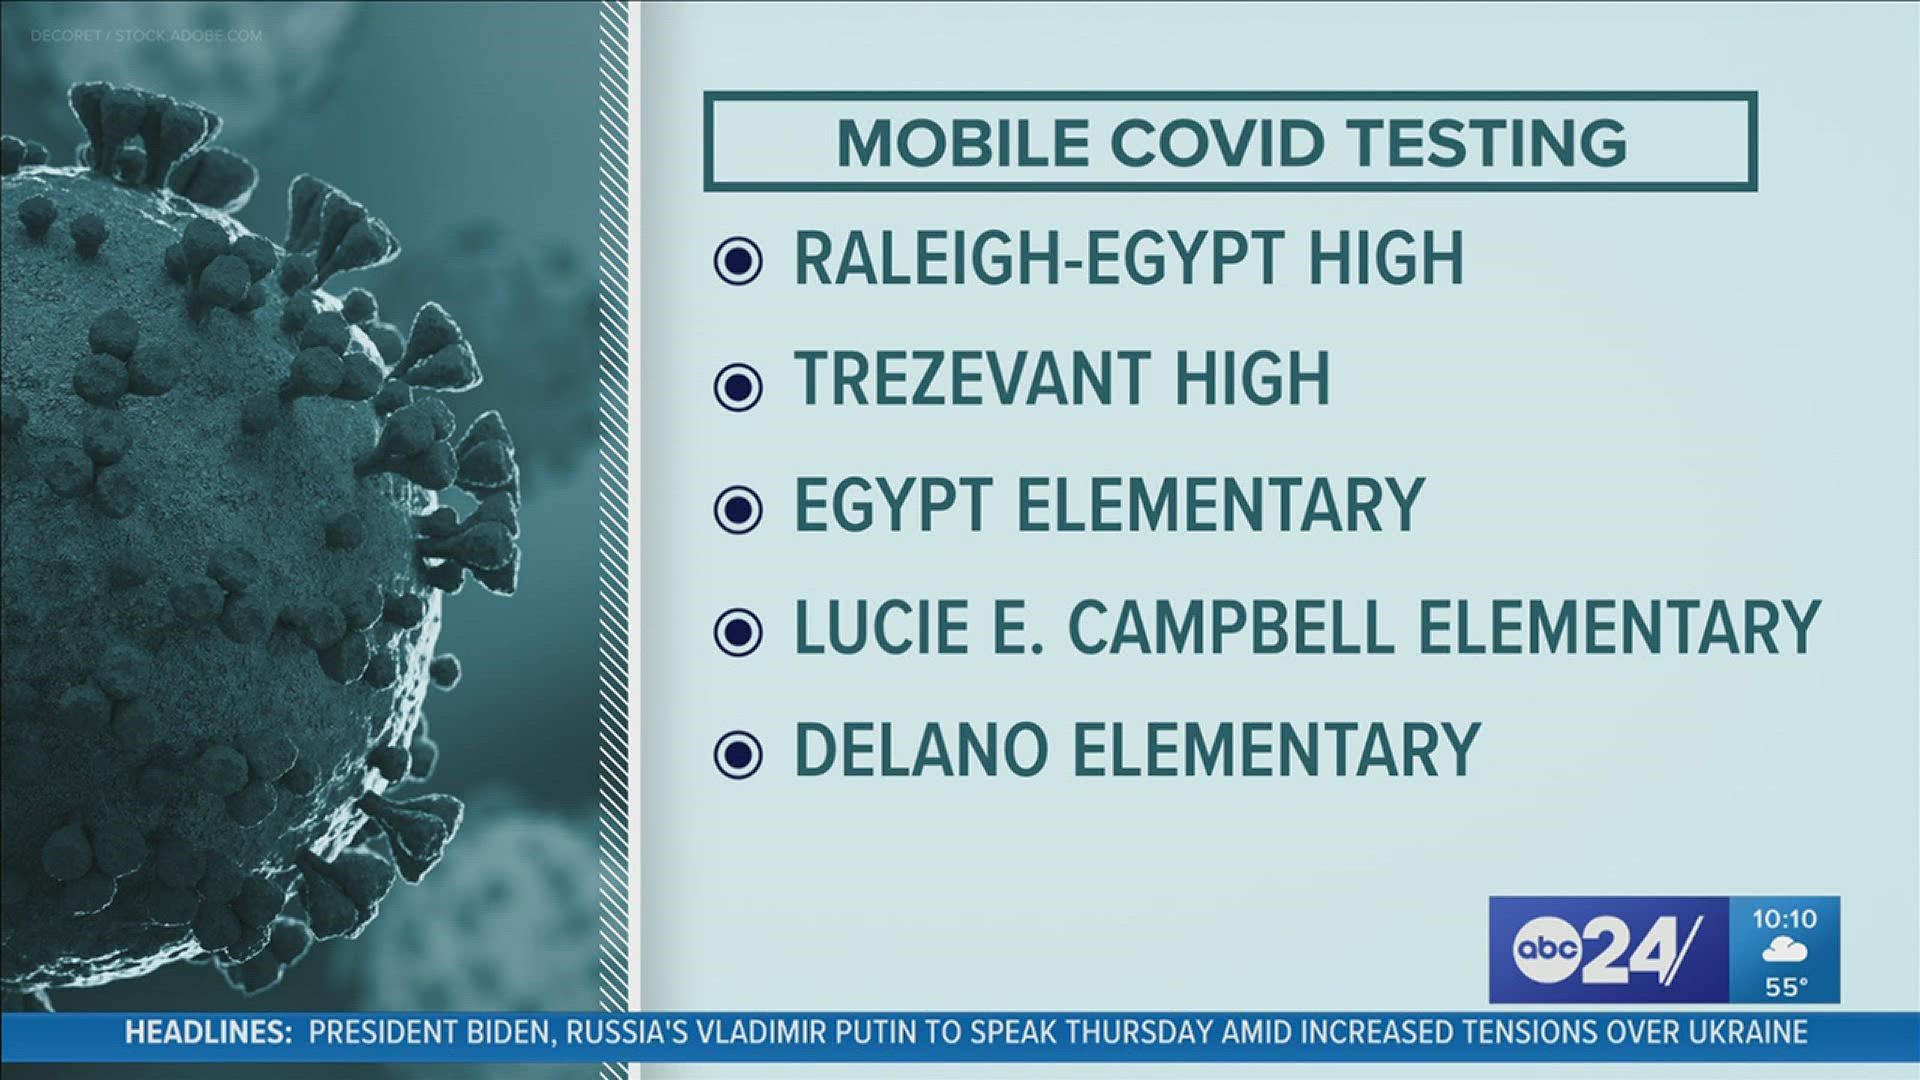 Shelby County Schools is reminding parents that there is one more day of mobile testing before students go back to school Monday.